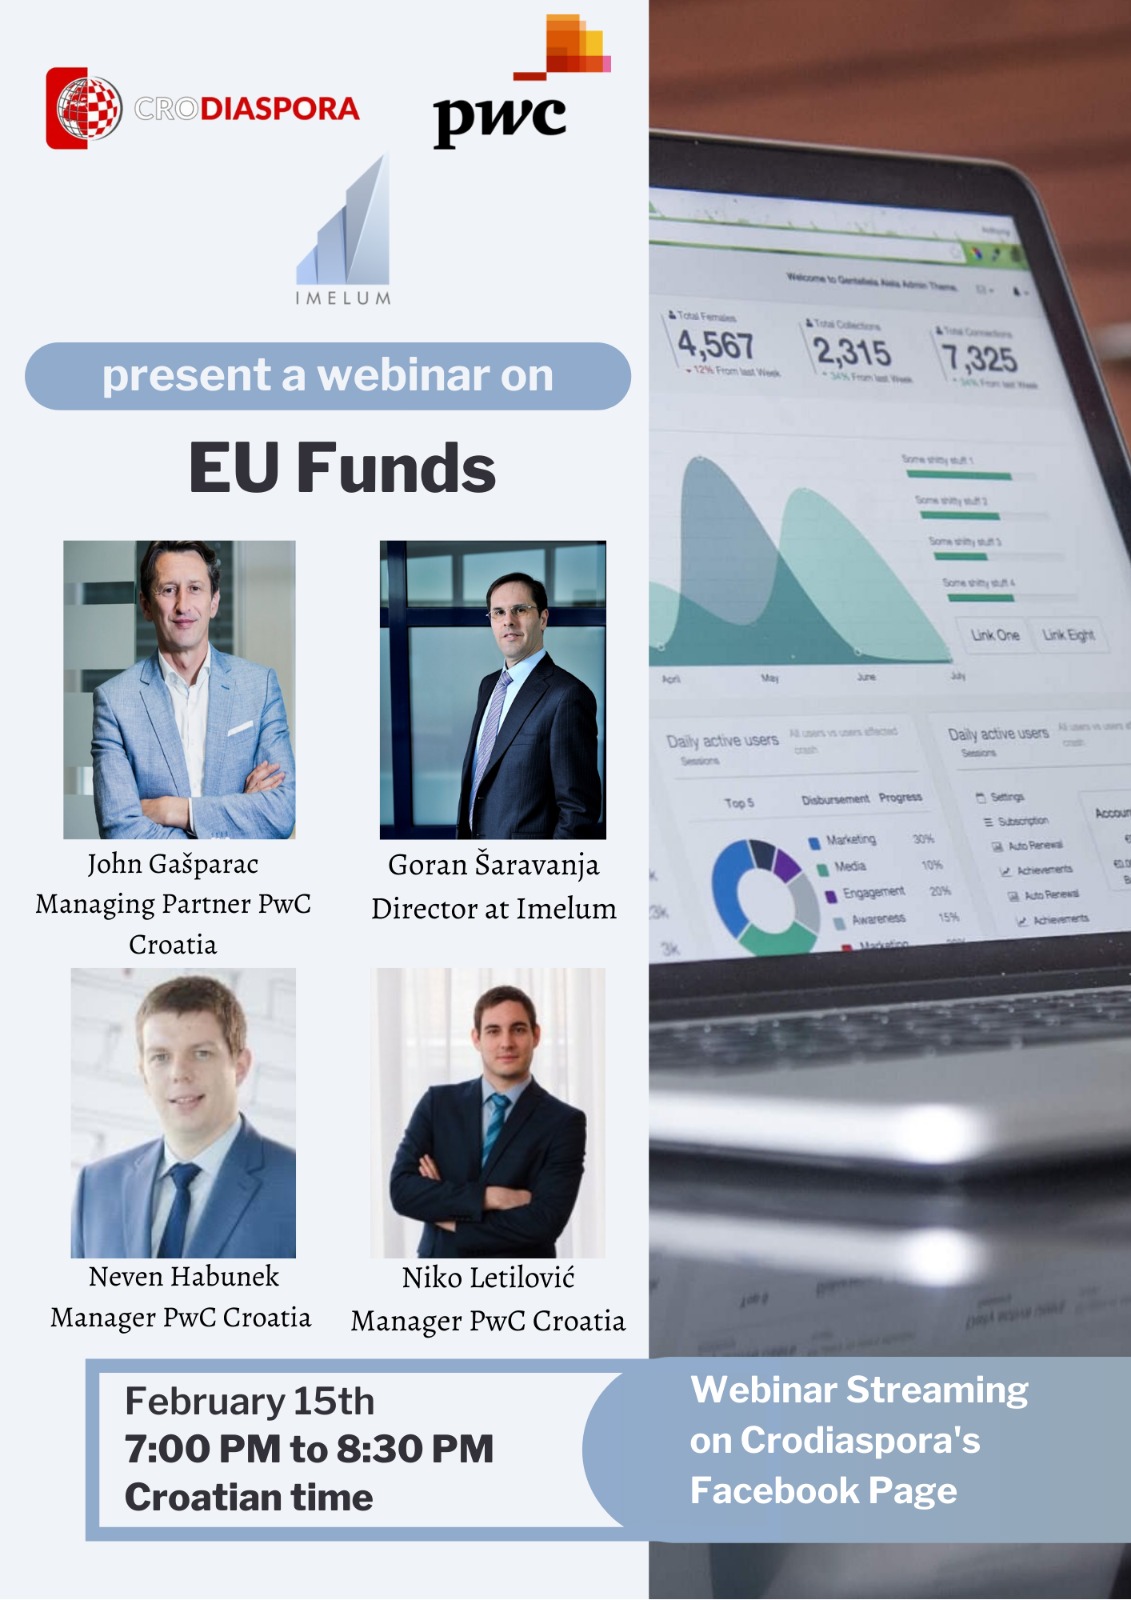 Learn how to access EU funds for you business in Croatia